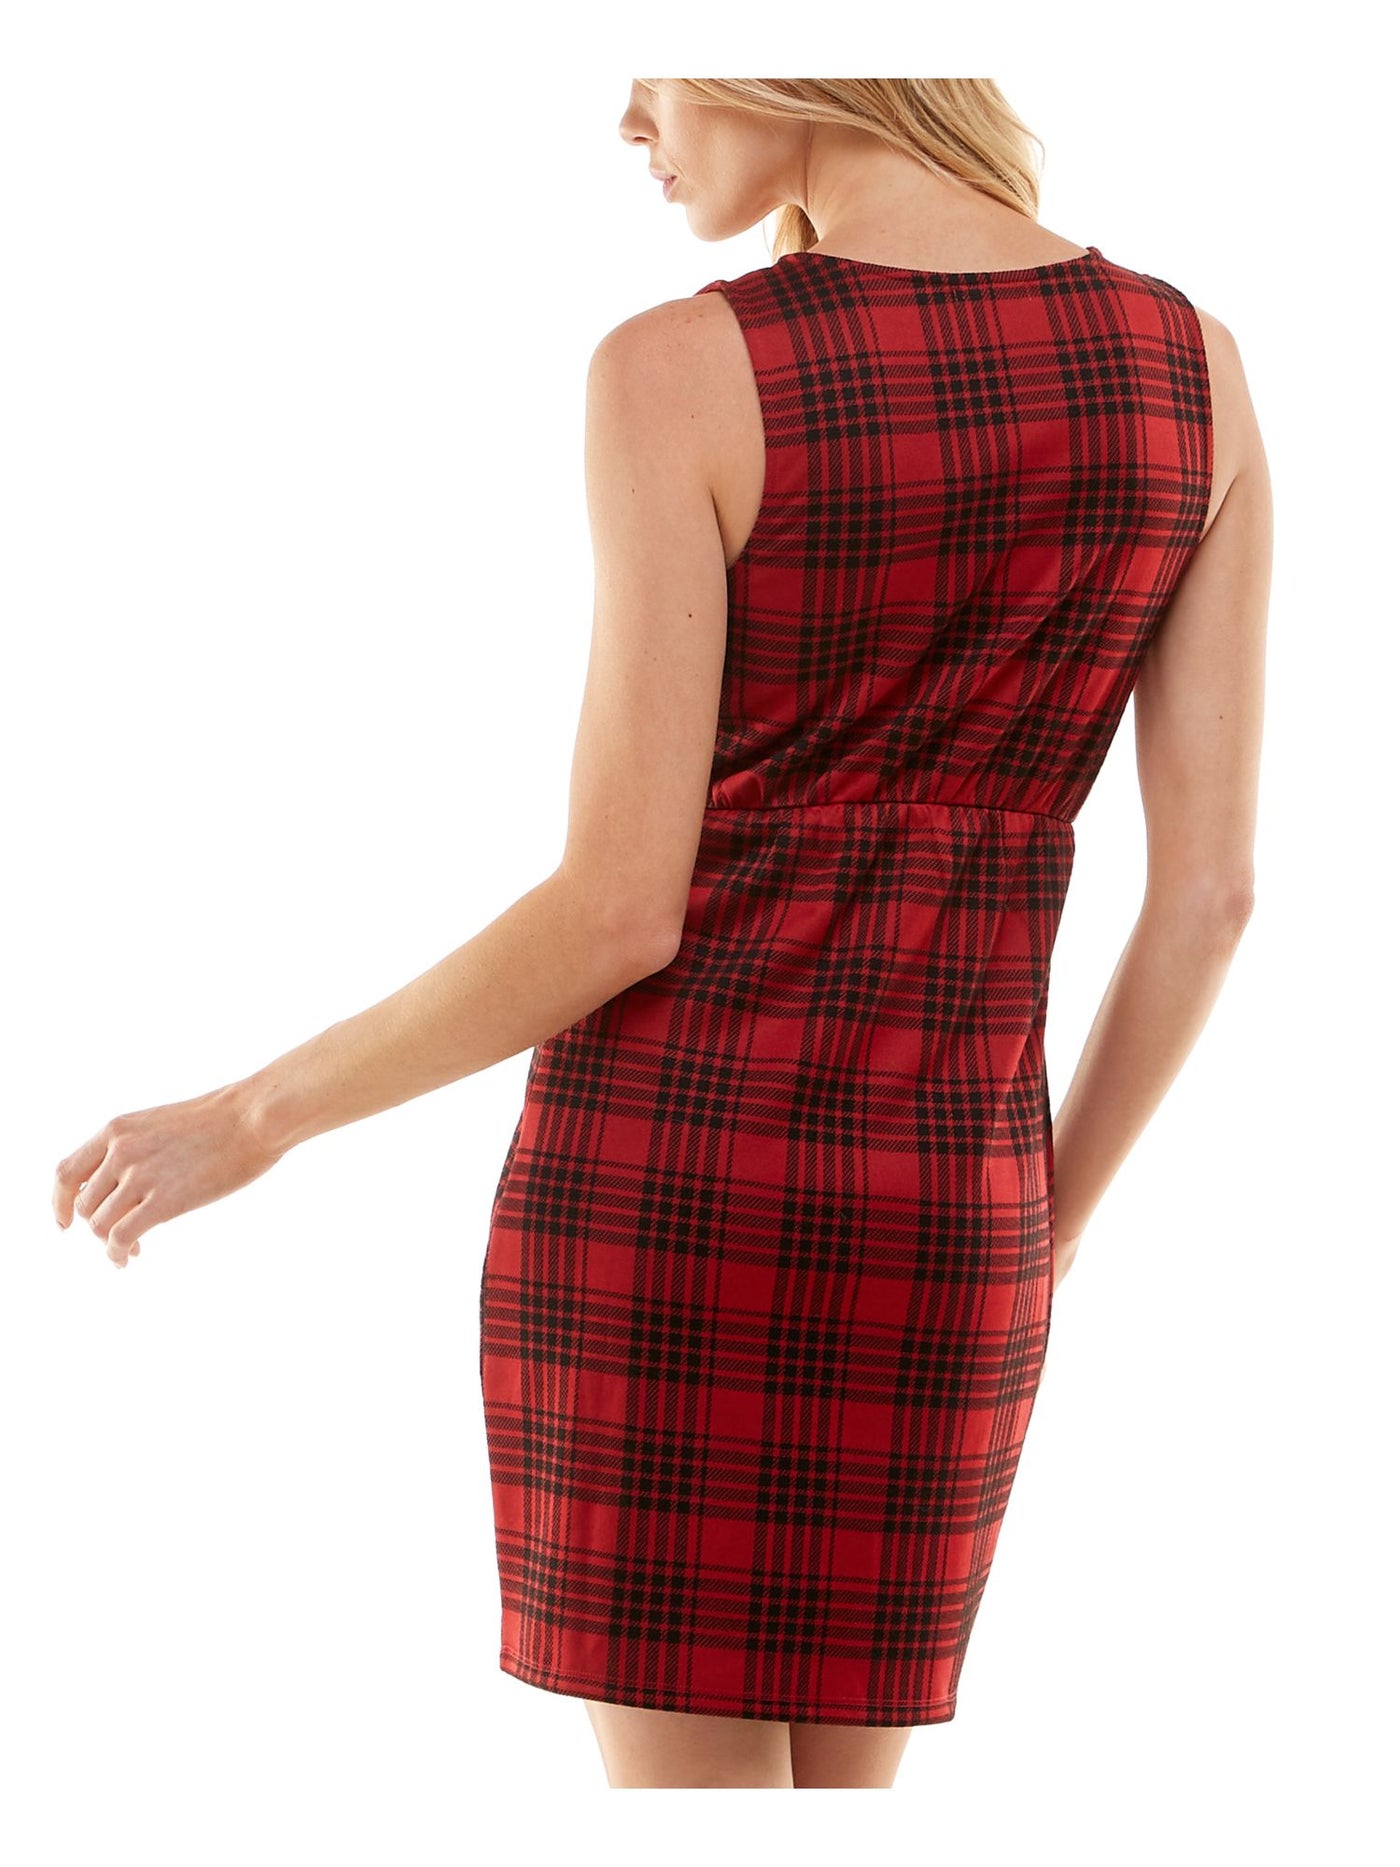 PLANET GOLD Womens Red Unlined Front Half-zip Closure Plaid Sleeveless V Neck Short Body Con Dress Juniors S